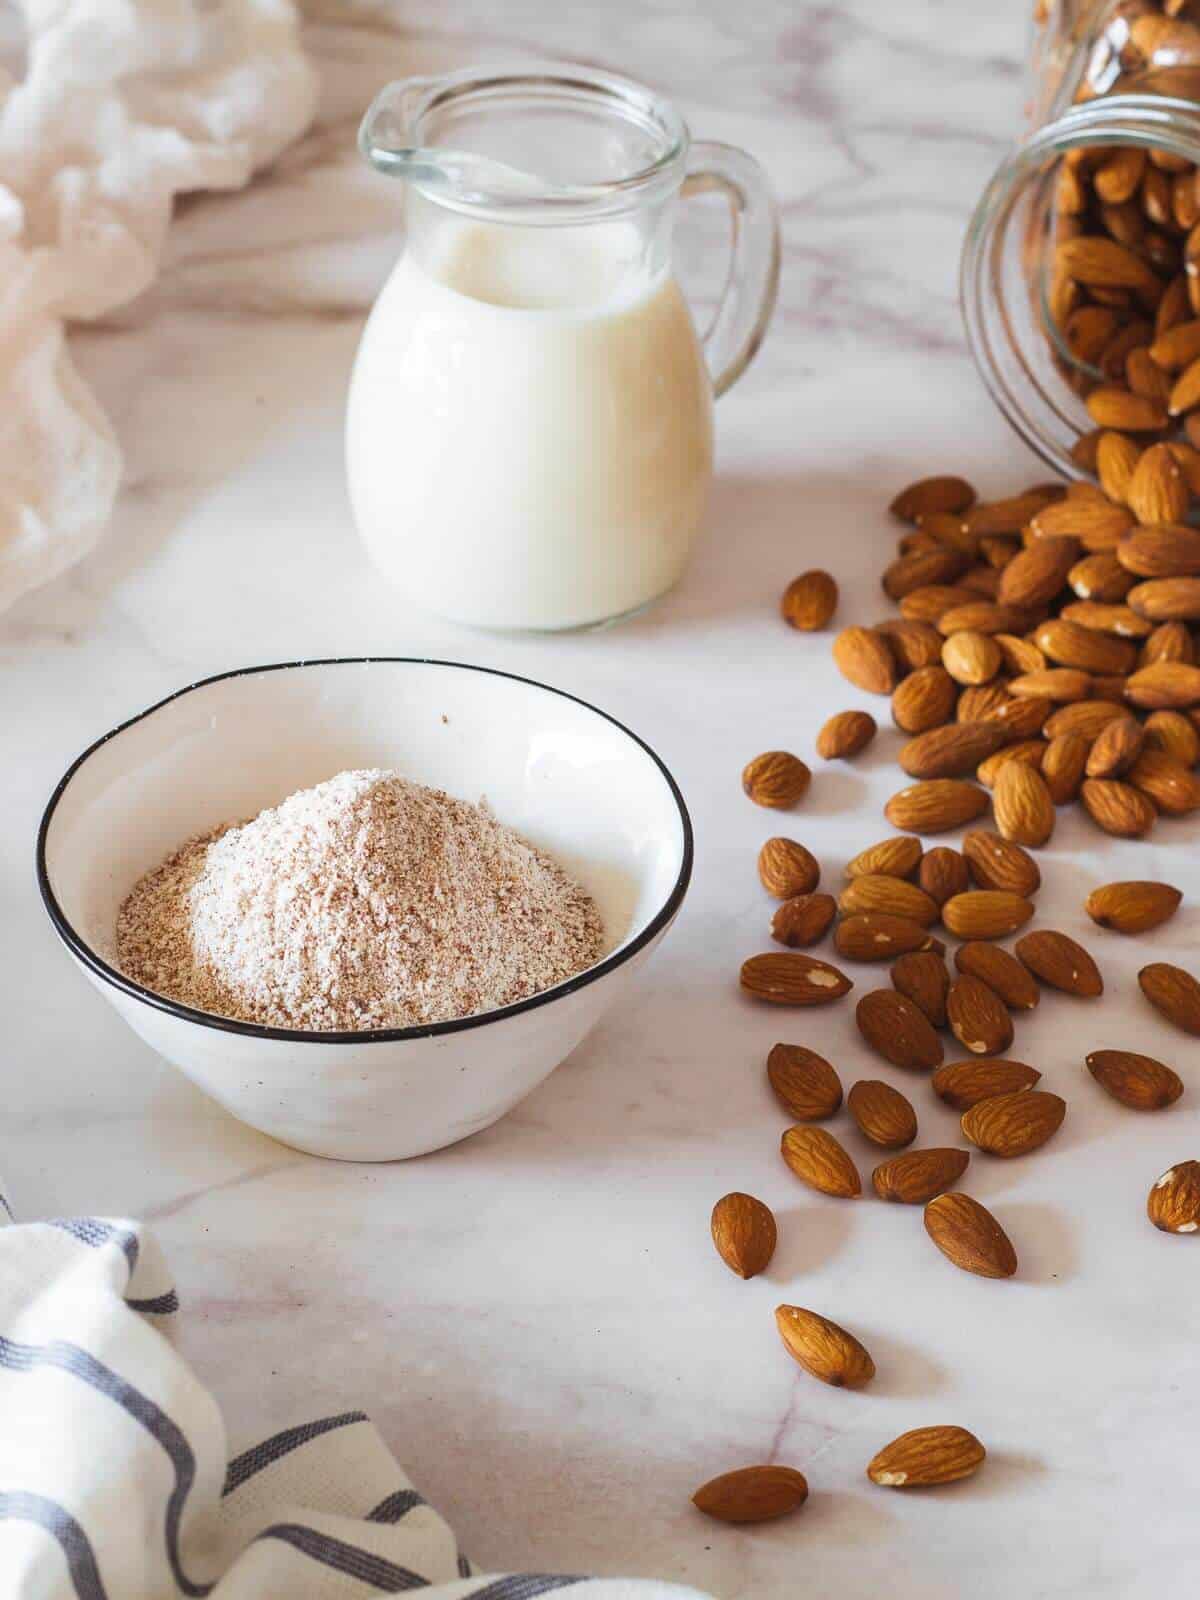 almond meal bowl next to raw almonds, cheesecloth and almond milk vase